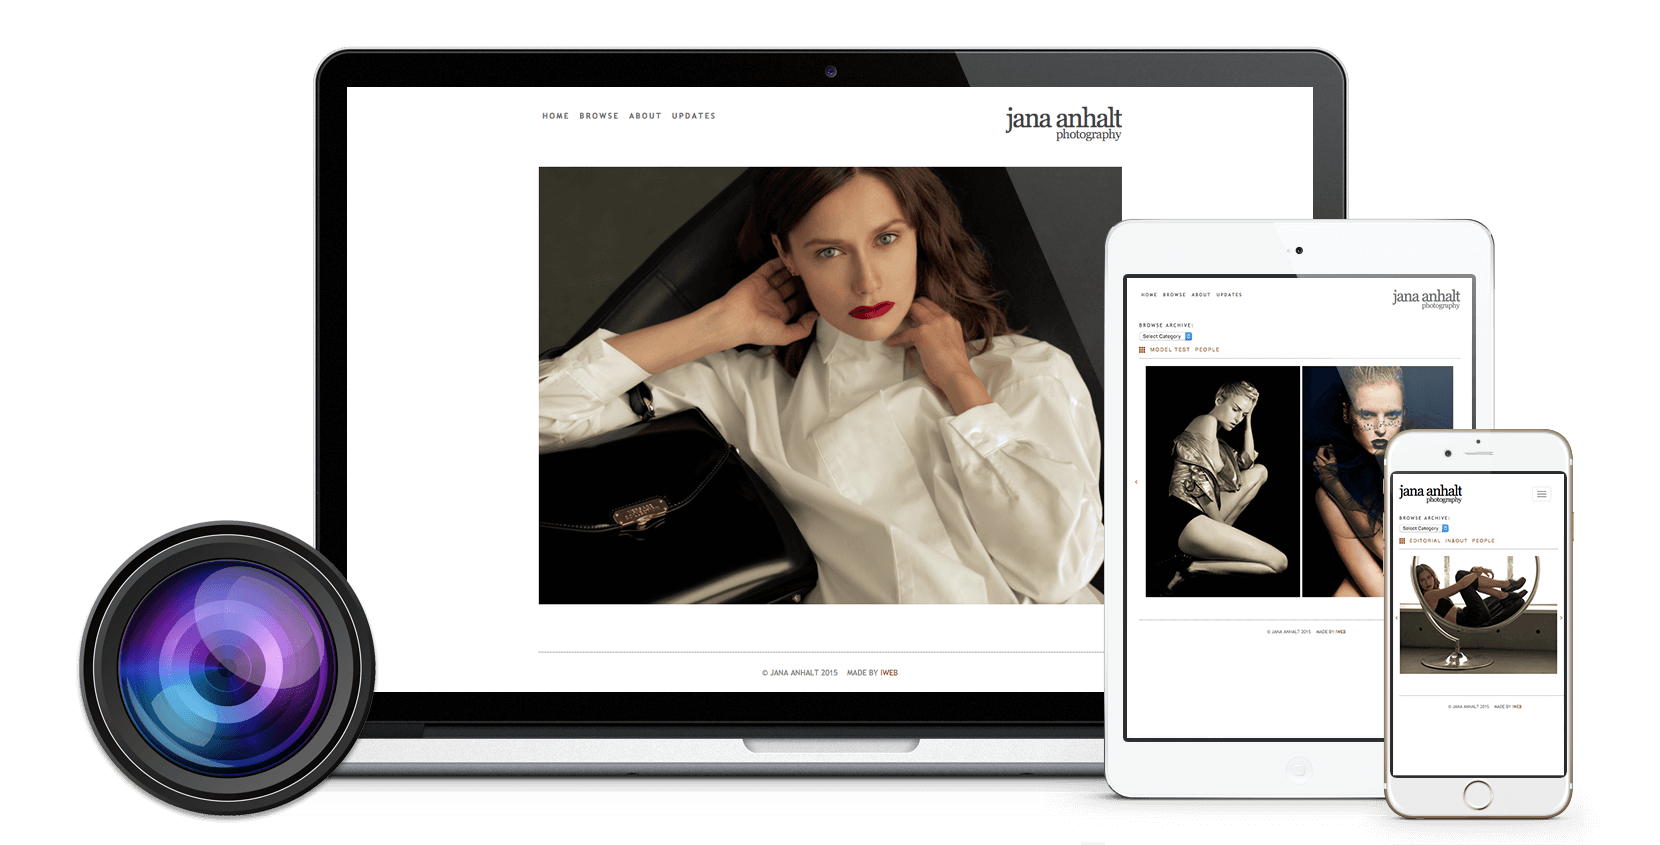 The main page of the Wormeline photo studio website, developed by iWeb